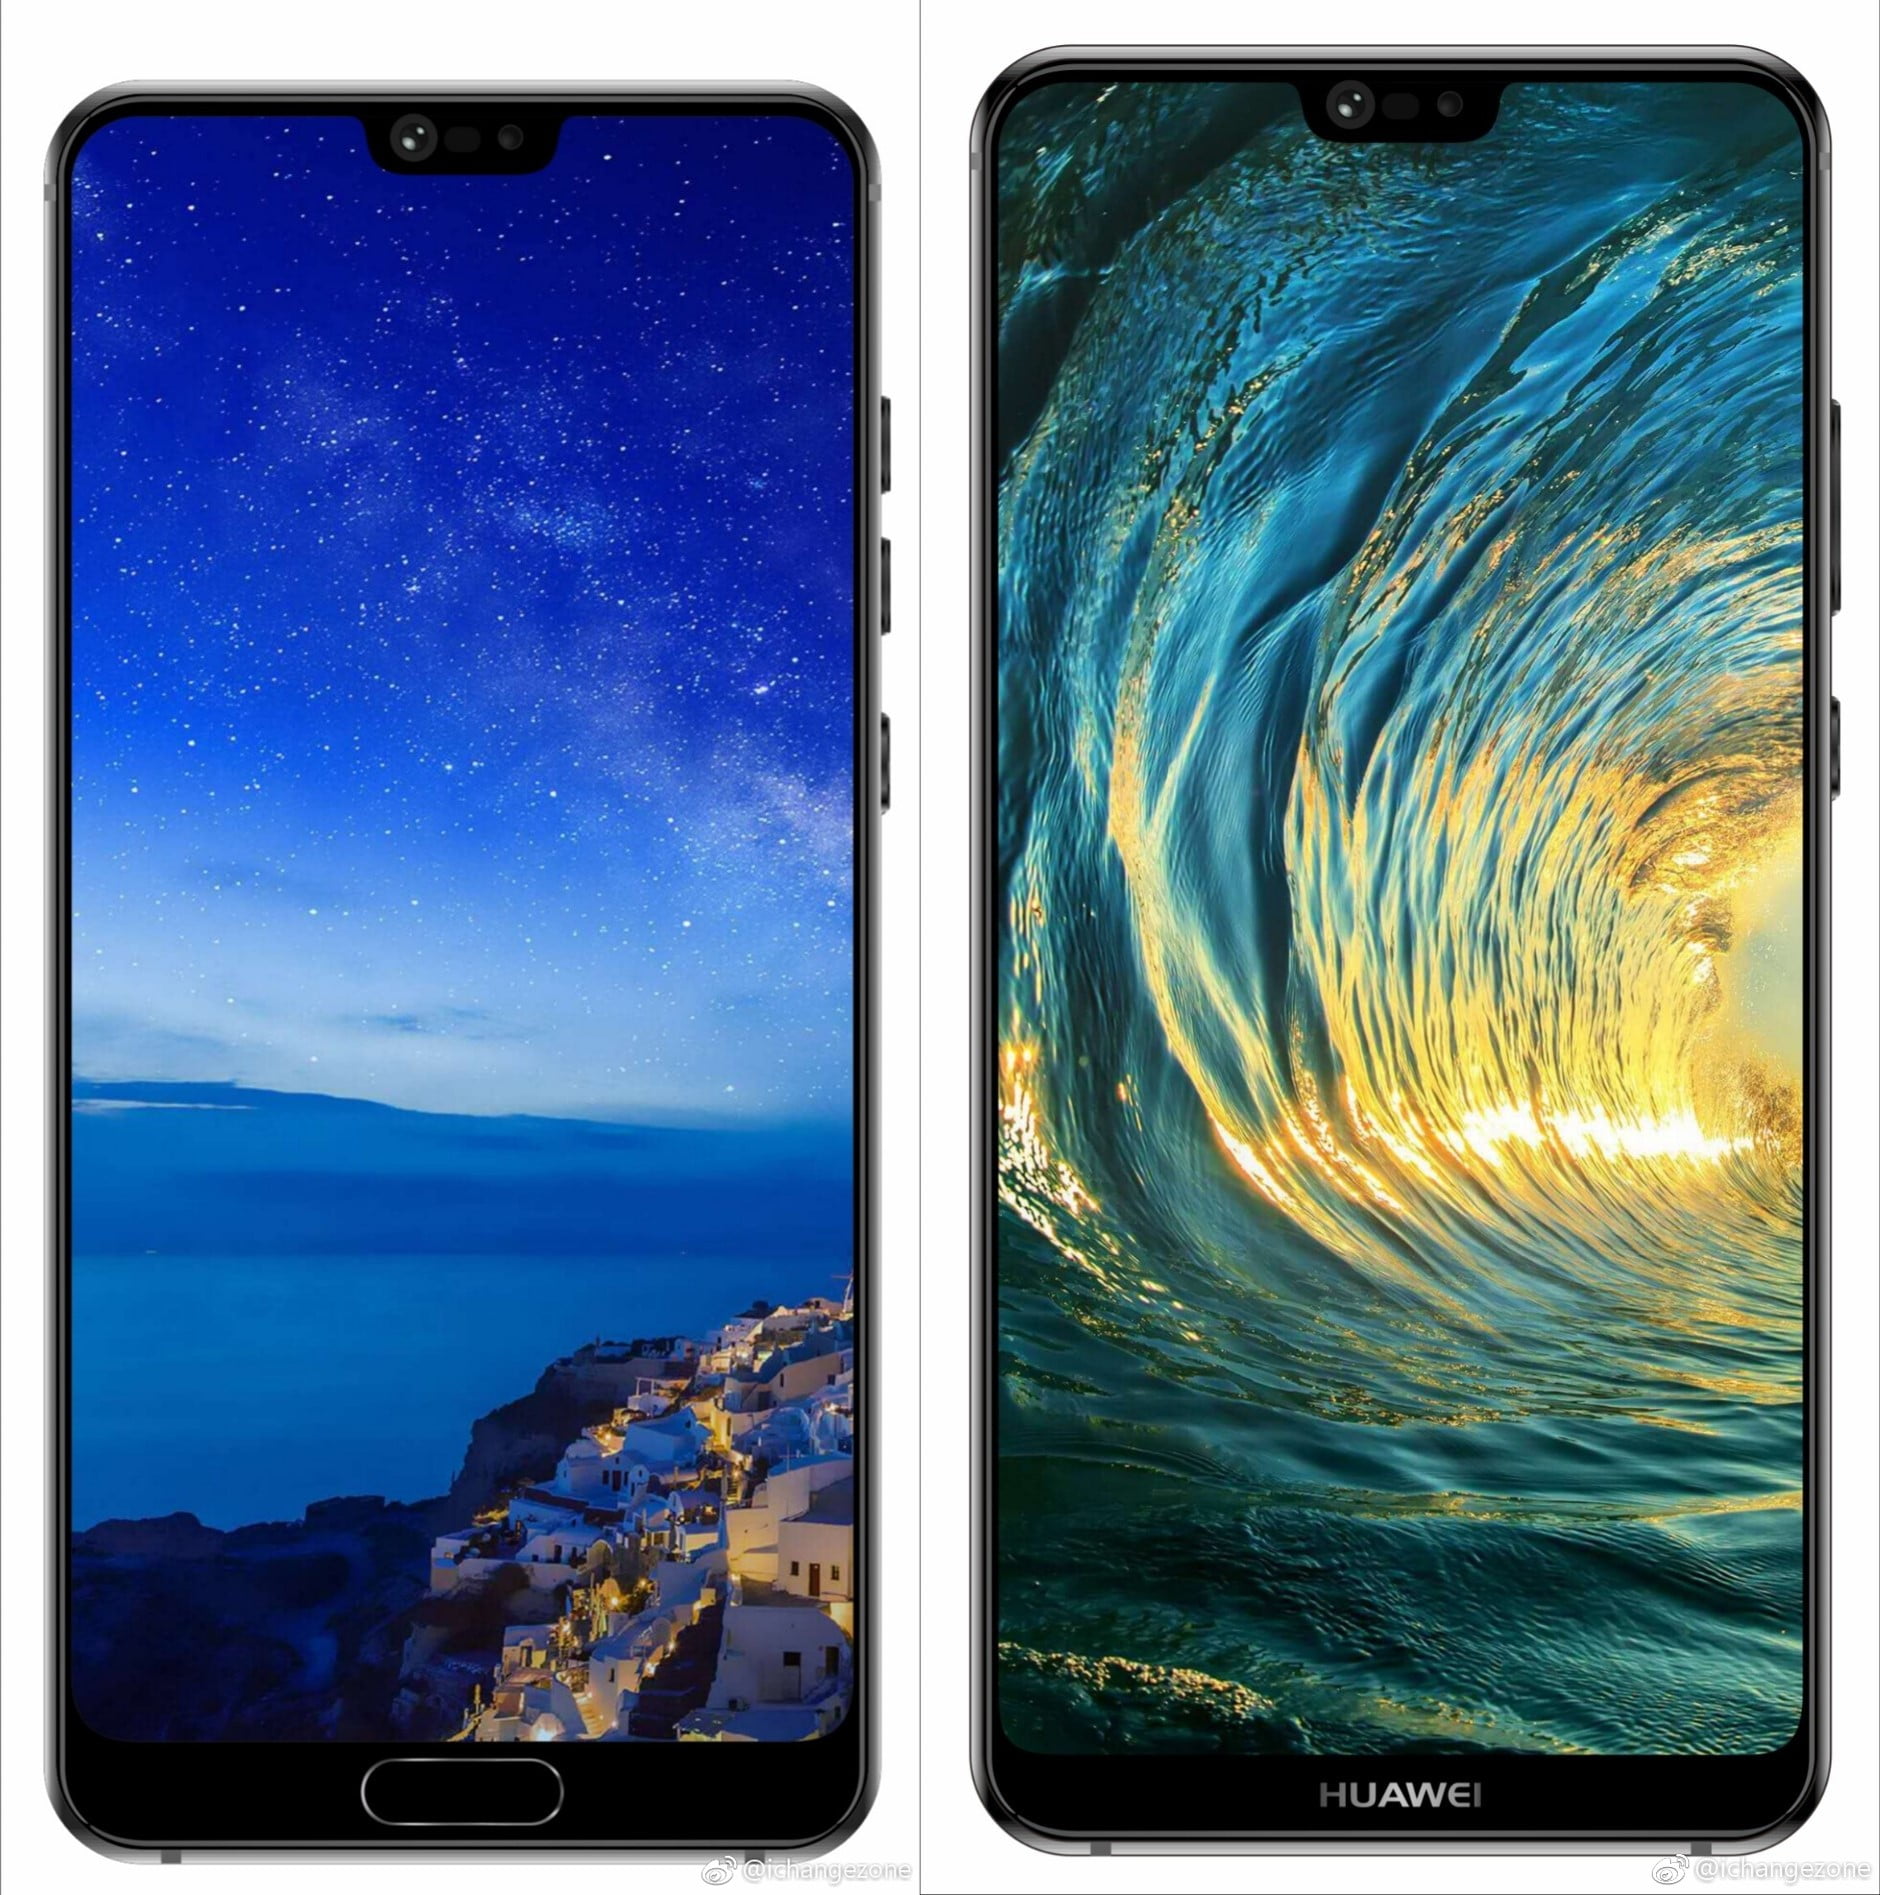 Huawei P20 and P20 Plus concept